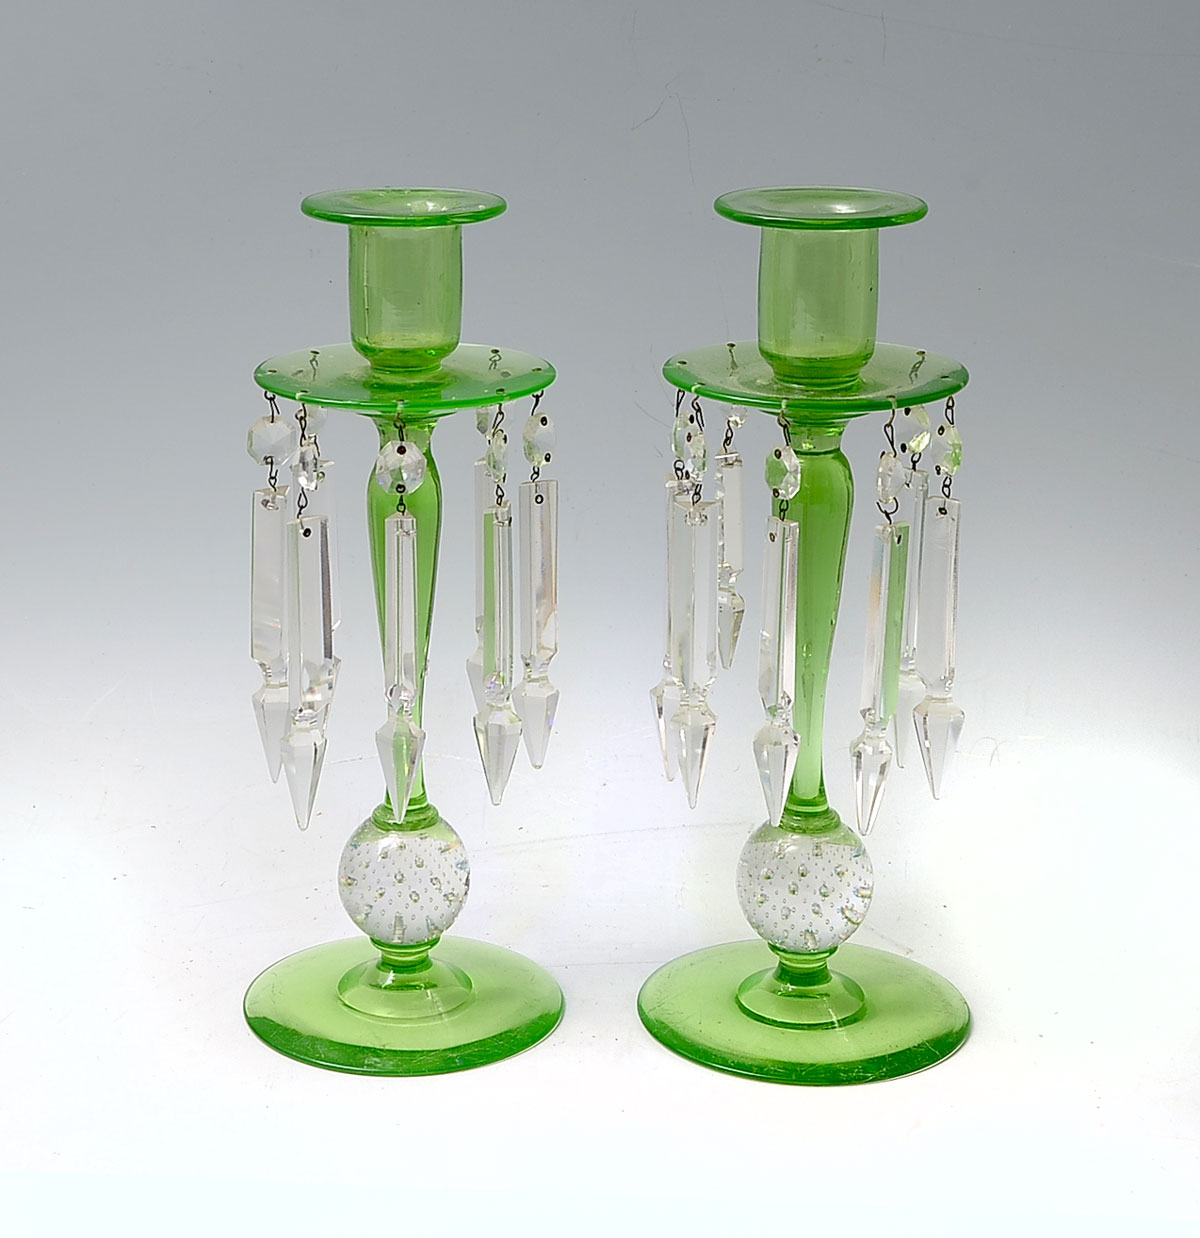 PAIR OF PAIRPOINT VASELINE GLASS